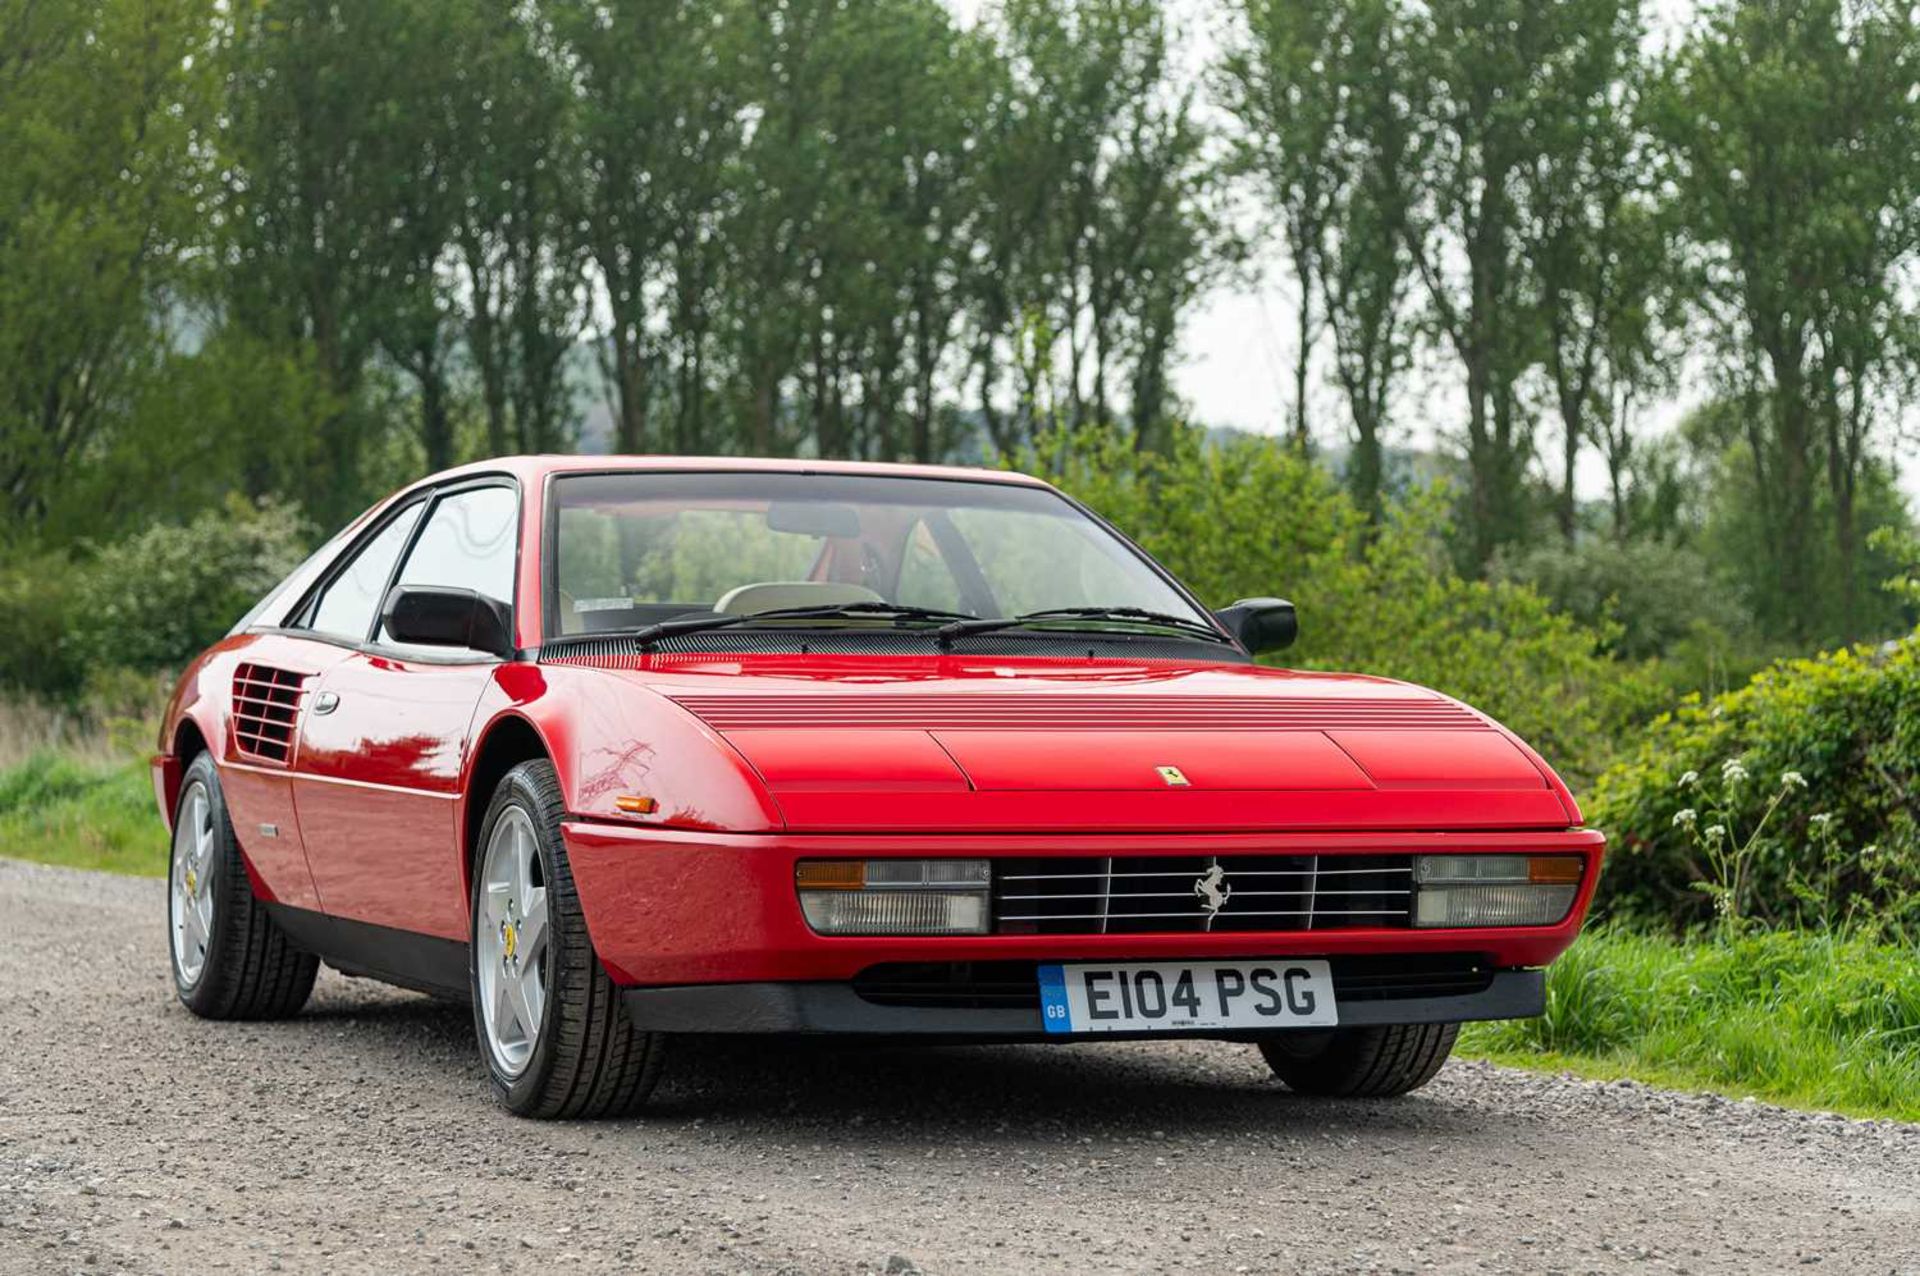 1988 Ferrari Mondial QV ***NO RESERVE*** Remained in the same ownership for nearly two decades finis - Image 11 of 91